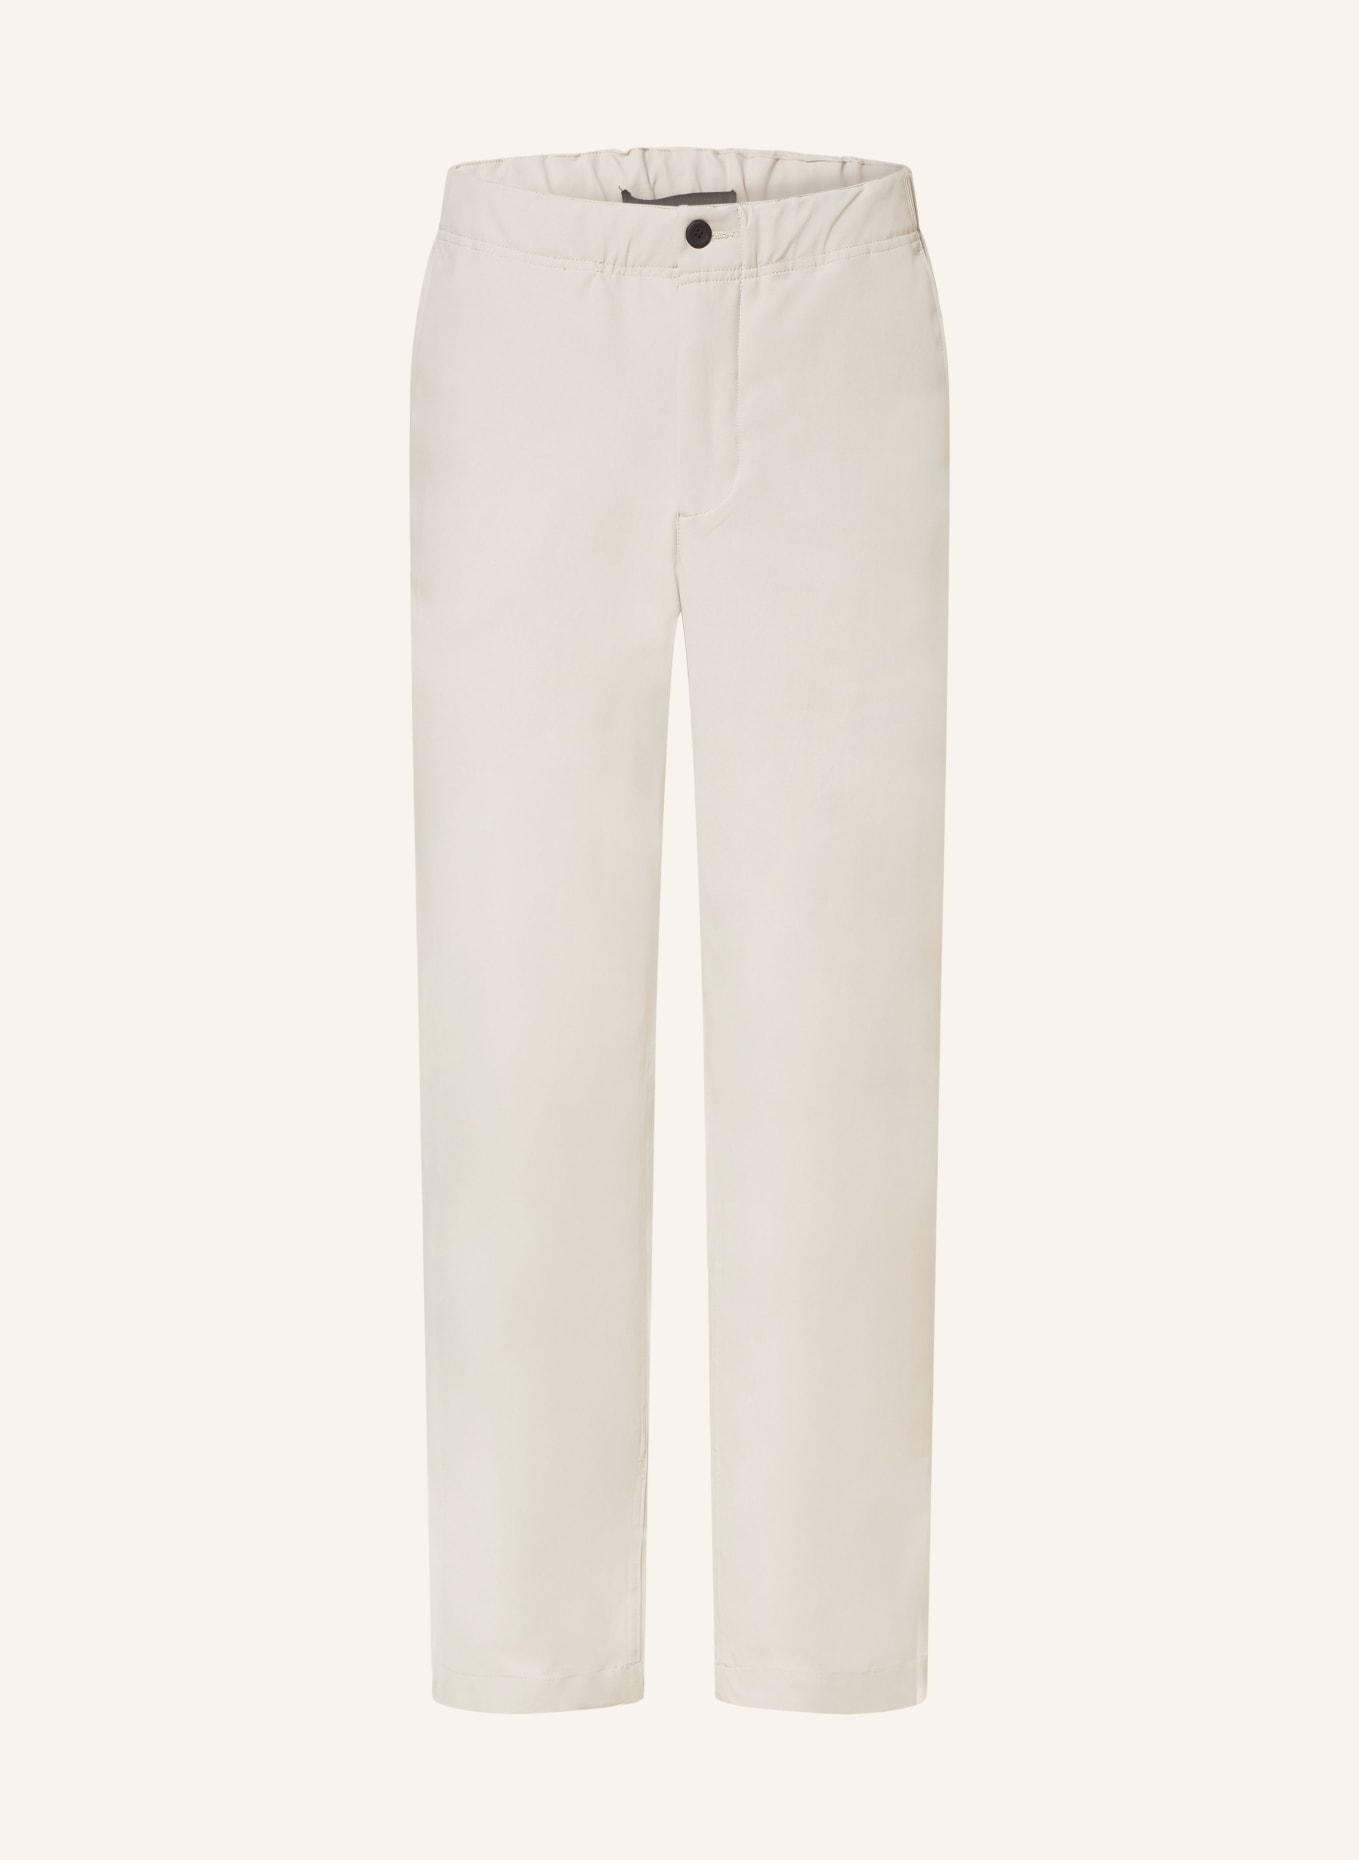 NORSE PROJECTS Chino EZRA Relaxed Fit, Farbe: STONE (Bild 1)